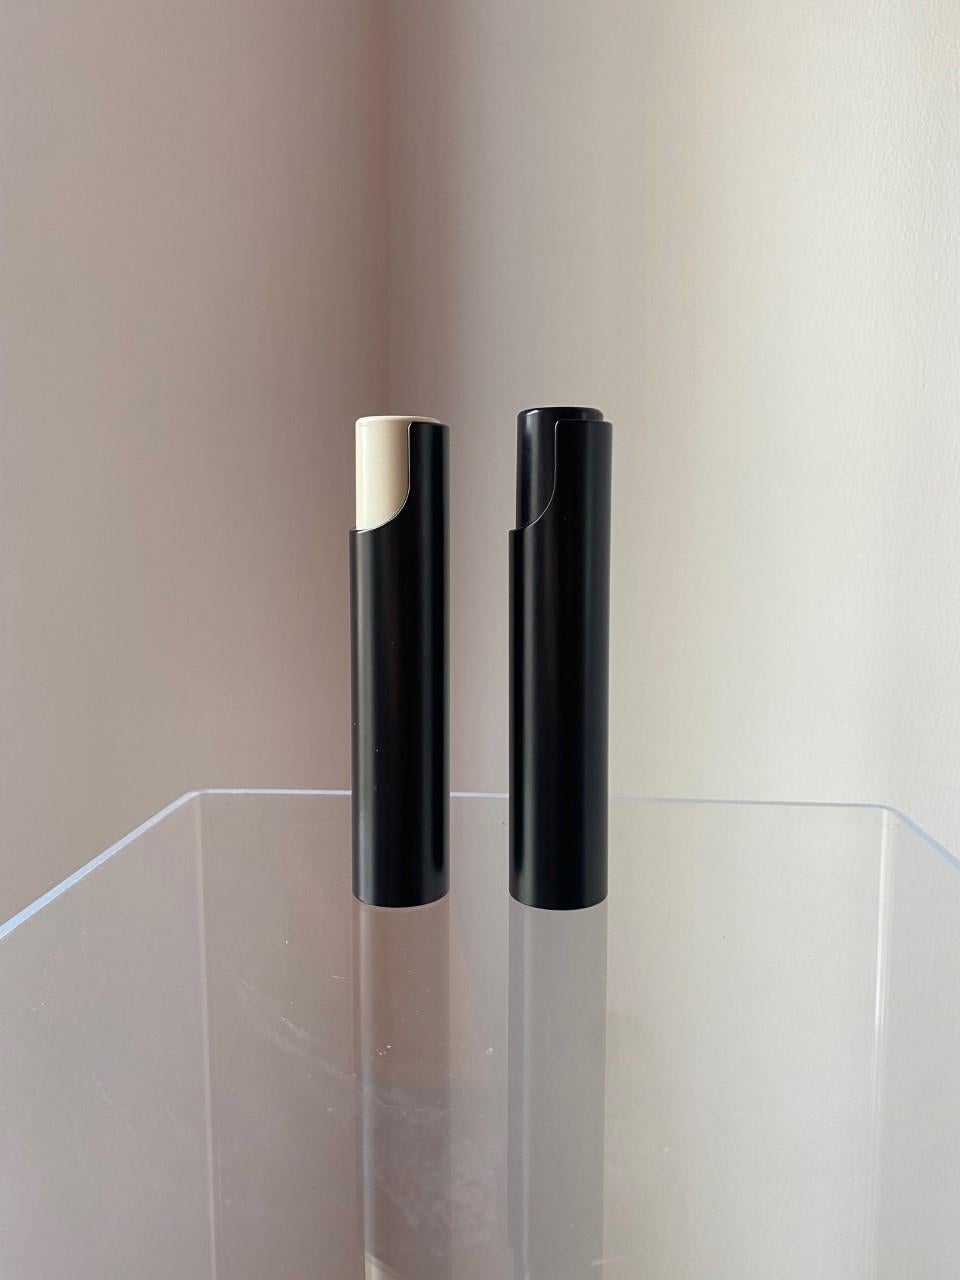 Beautiful set of salt and pepper shakers by iconic retailer Turpan Sanders. This set from the 1980s brings you minimal postmodern vibes to your table. The legendary Soho retailer did not sacrifice style and taste. Sculptural in form, these column